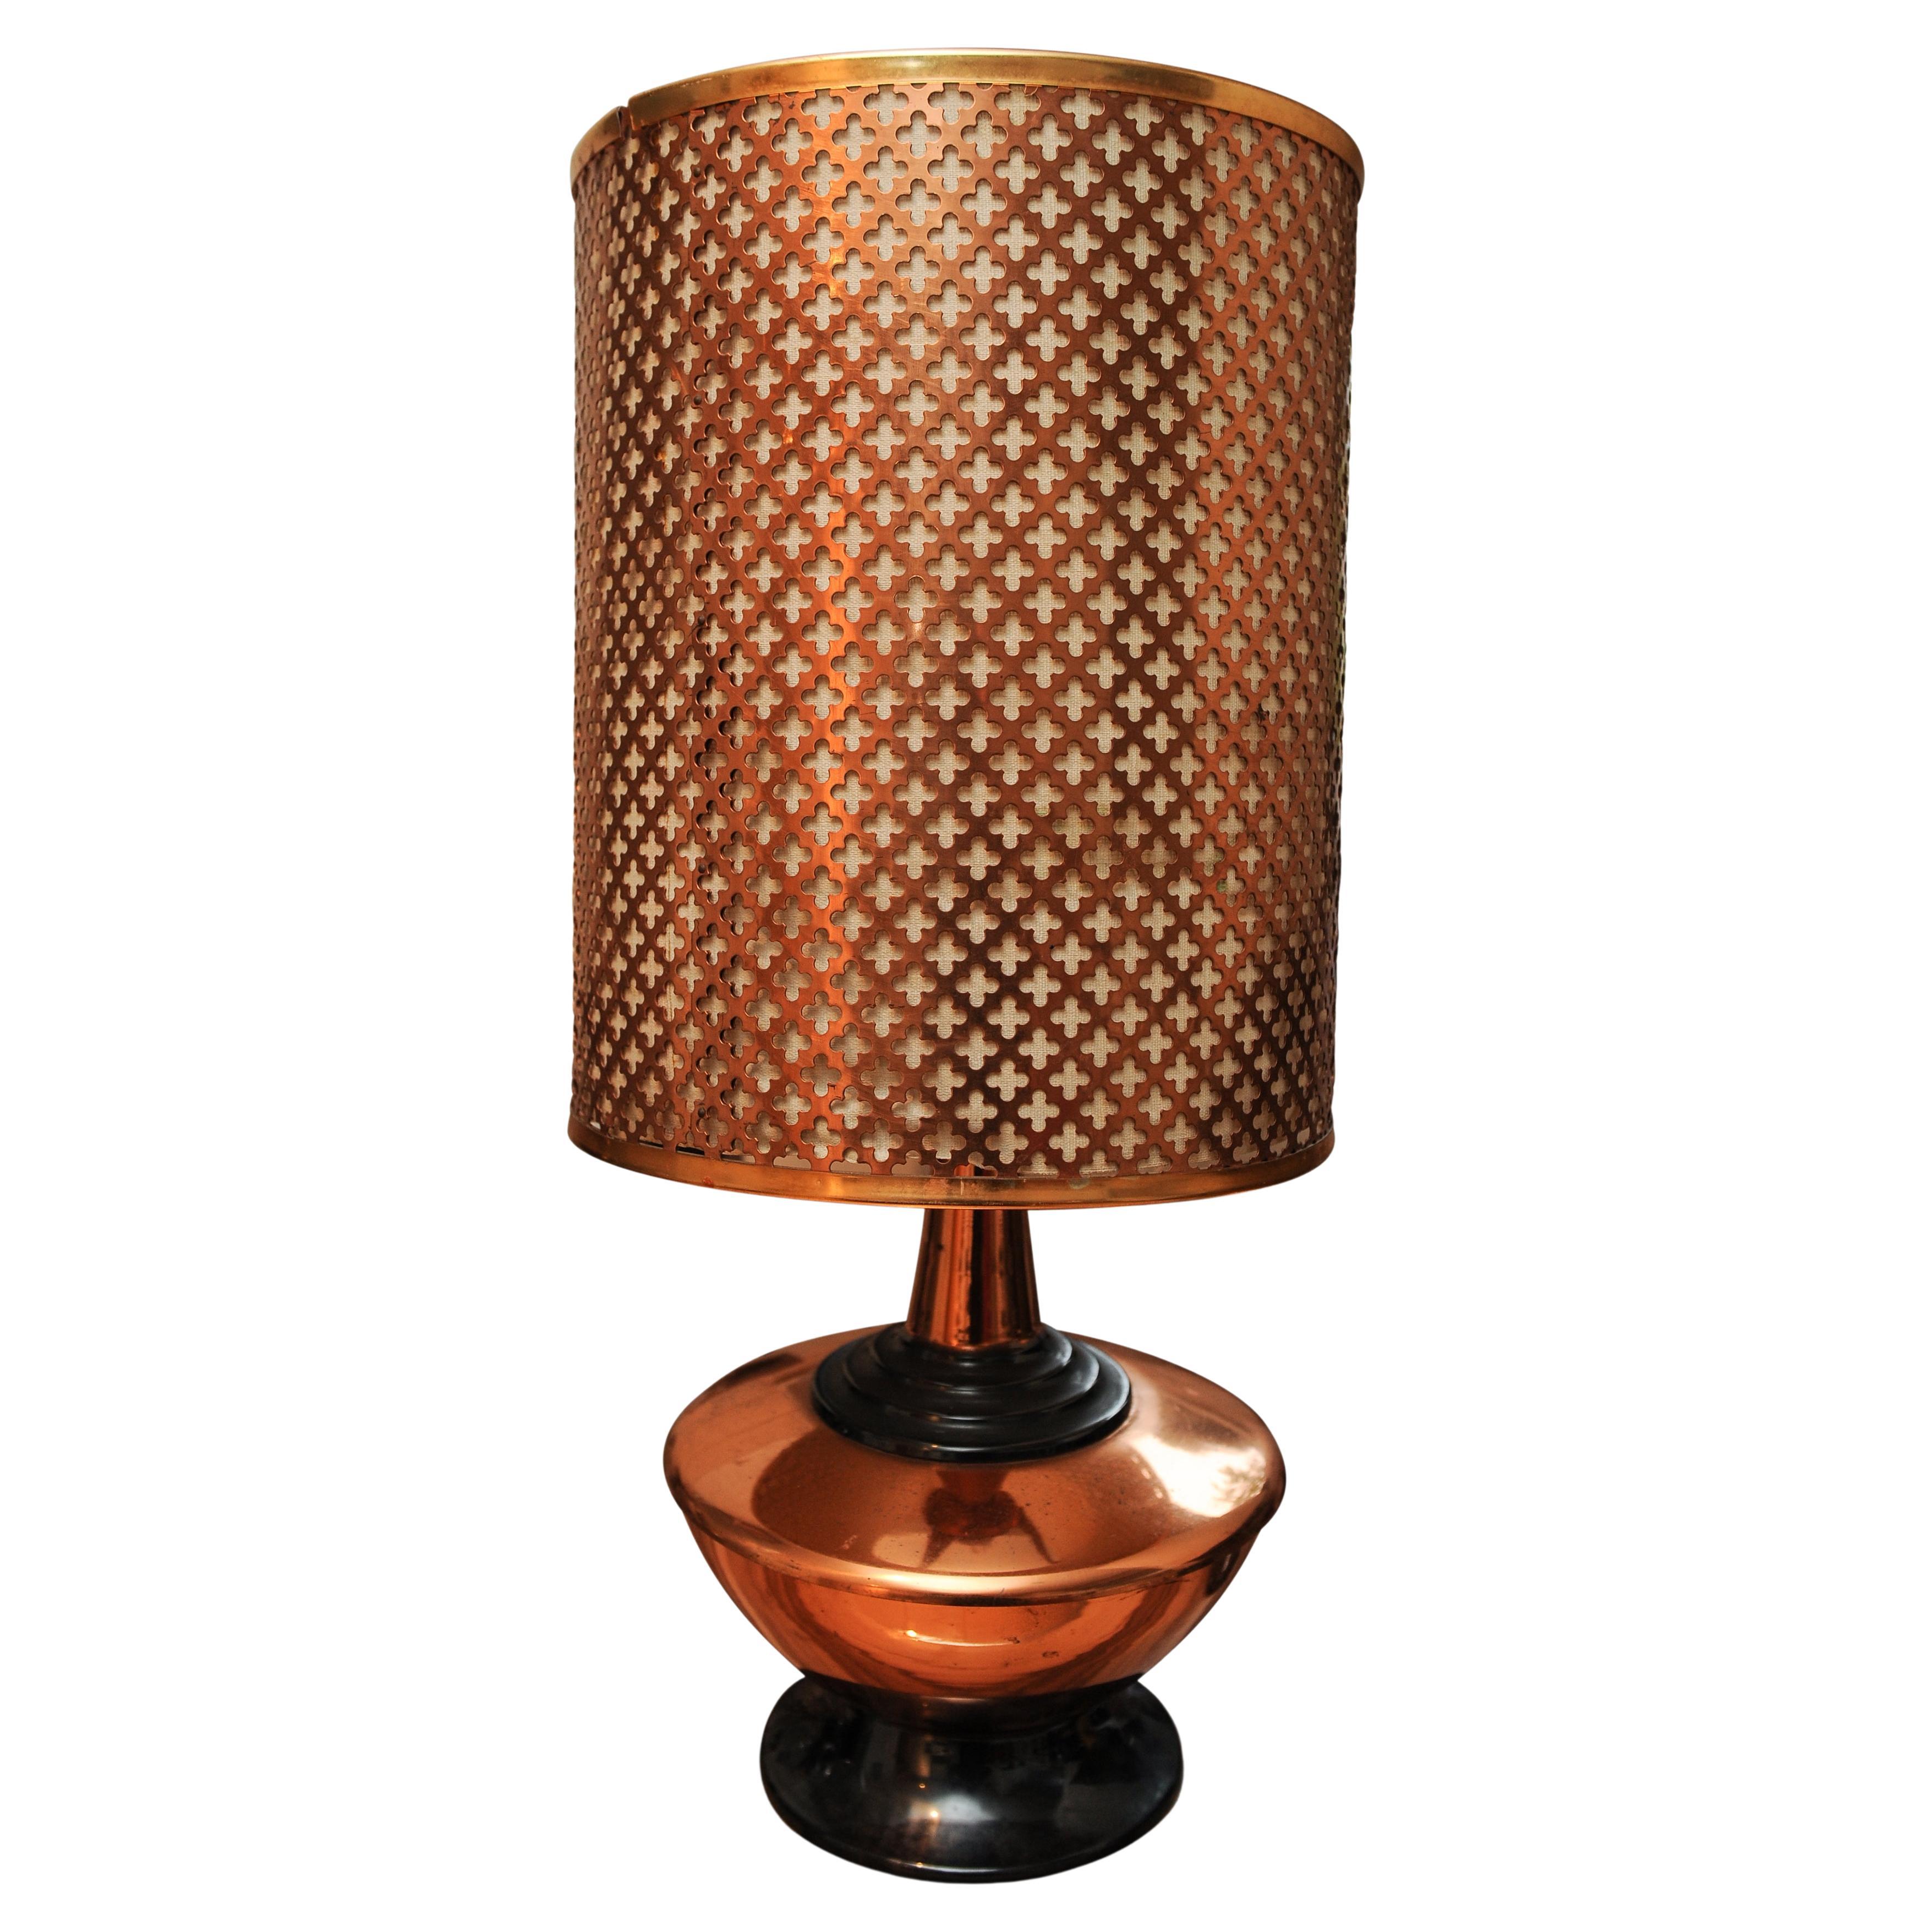 A Mid Century Zambian Copper Table Lamp With An Alhambra Design To Light Shade For Sale